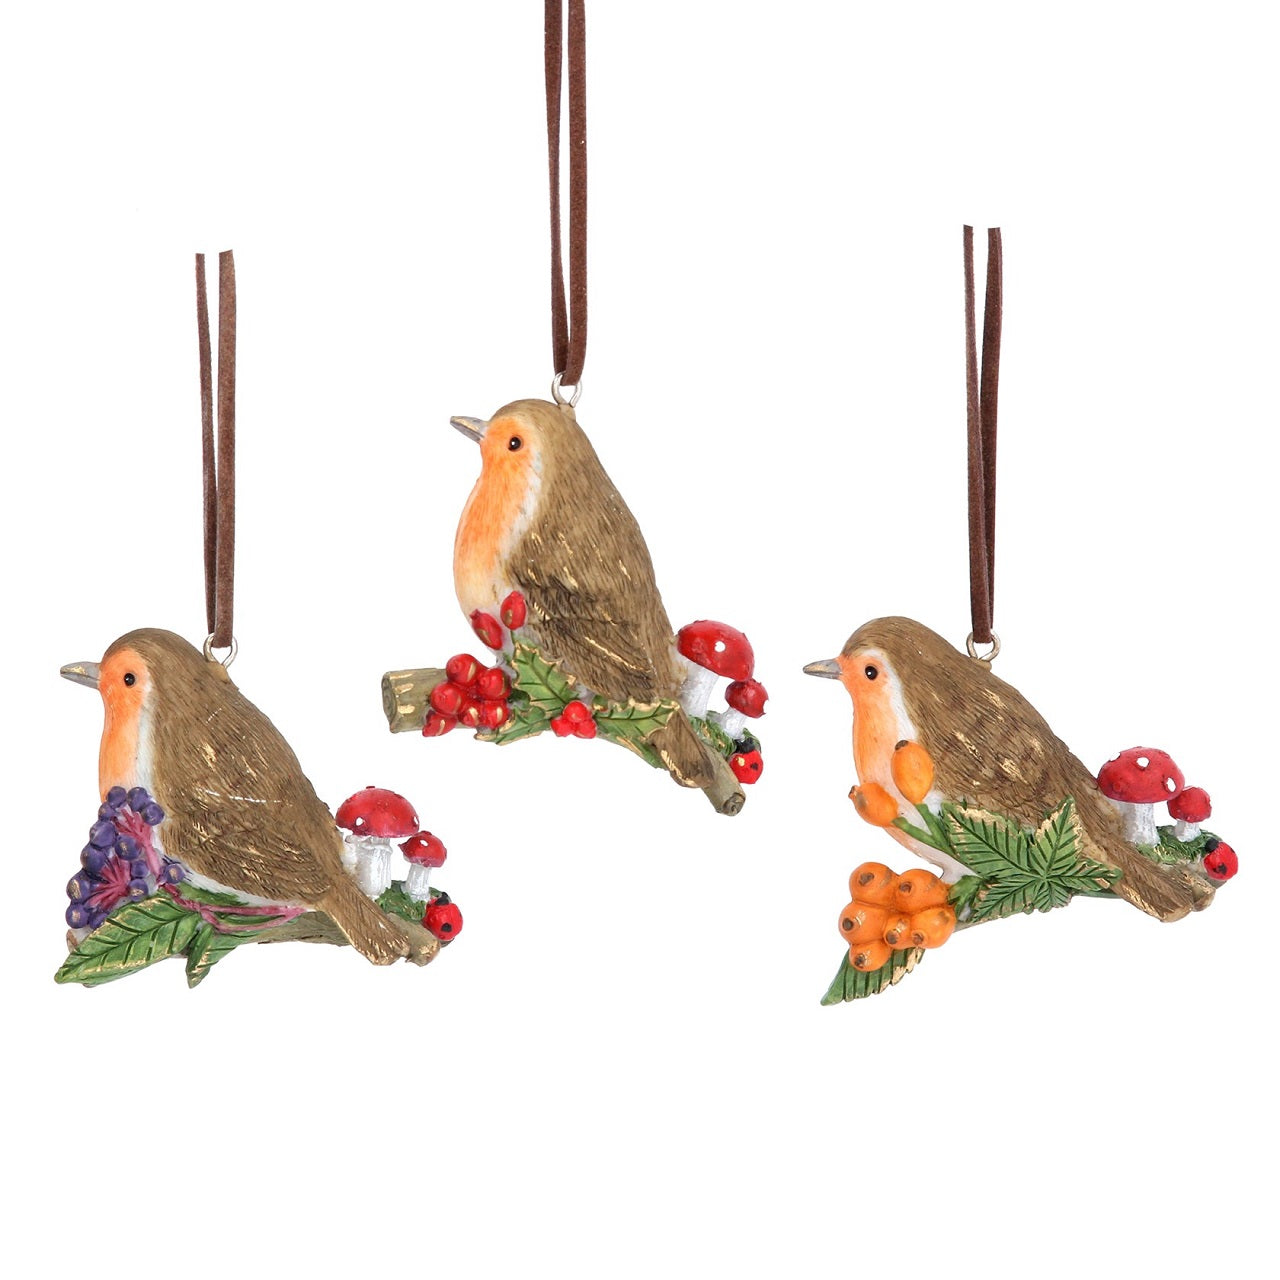 Gisela Graham Robin Perched on Twig Christmas Hanging Ornament - Orange Berry  Browse our beautiful range of luxury Christmas tree decorations, fairy & ornaments for your tree this Christmas.  Add style to your Christmas tree with these elegant Christmas resin Robin perched on a twig decorated with toadstool and orange berries.